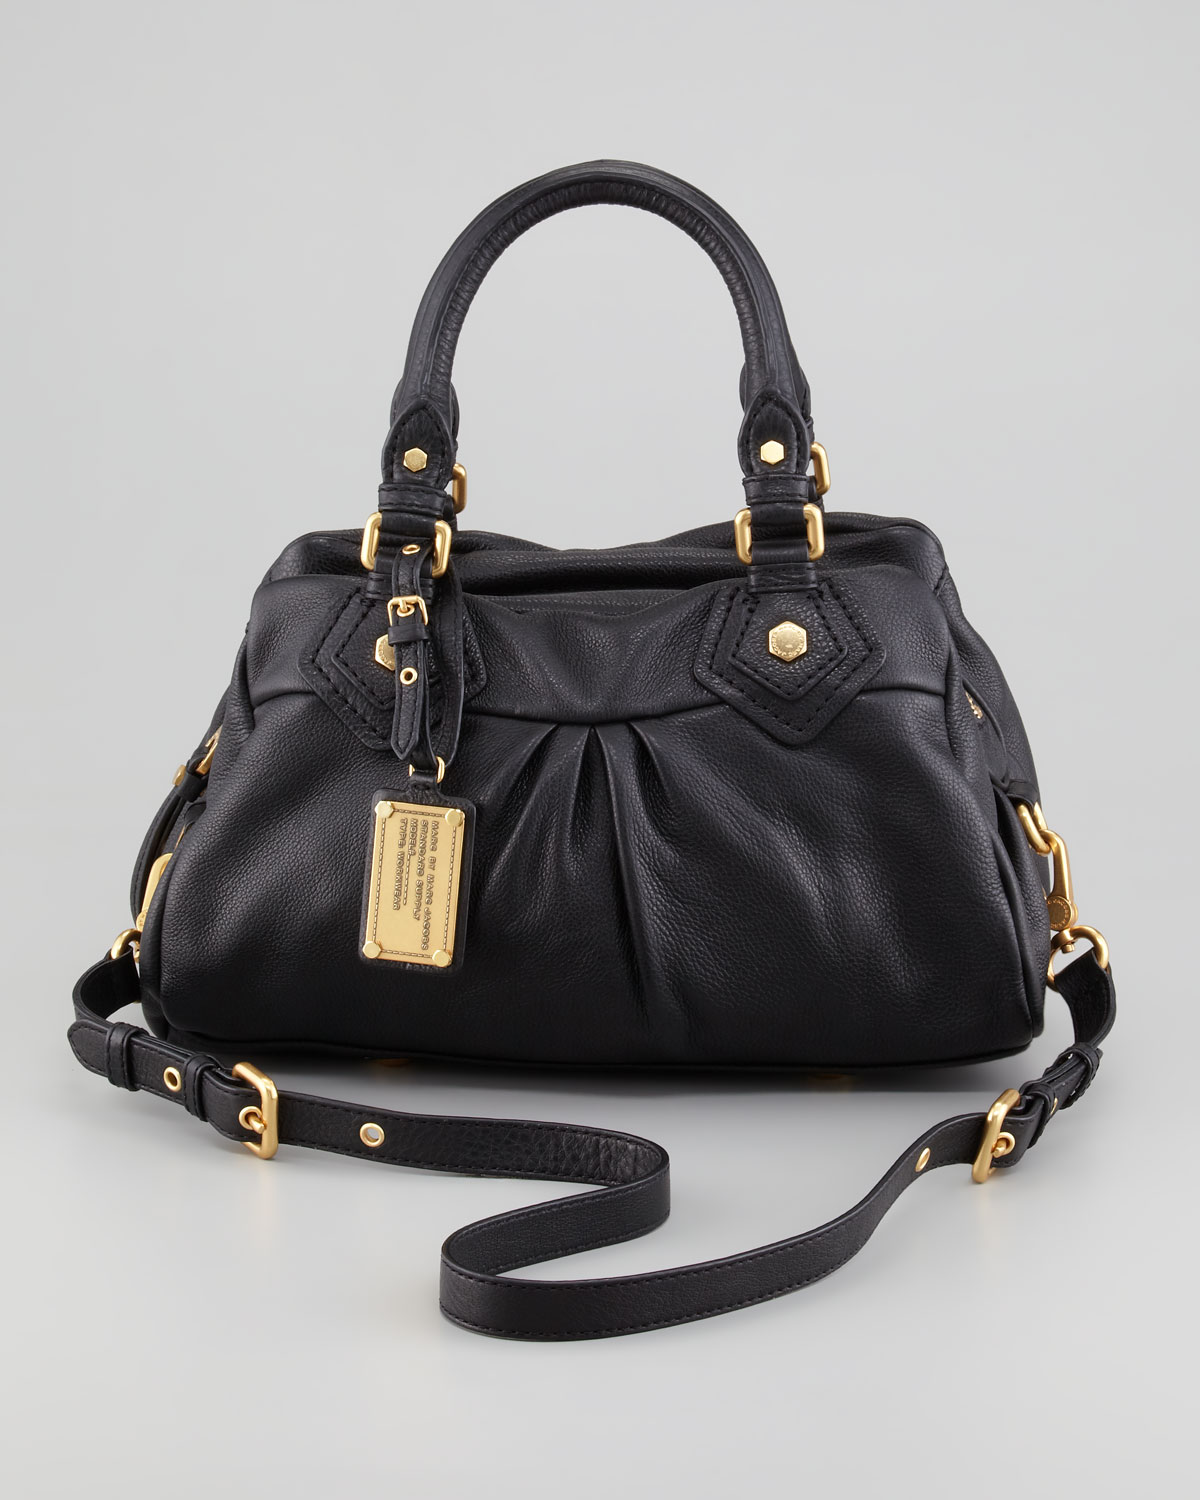 Marc by marc jacobs Classic Q Baby Groovee Satchel Bag Black in Black ...